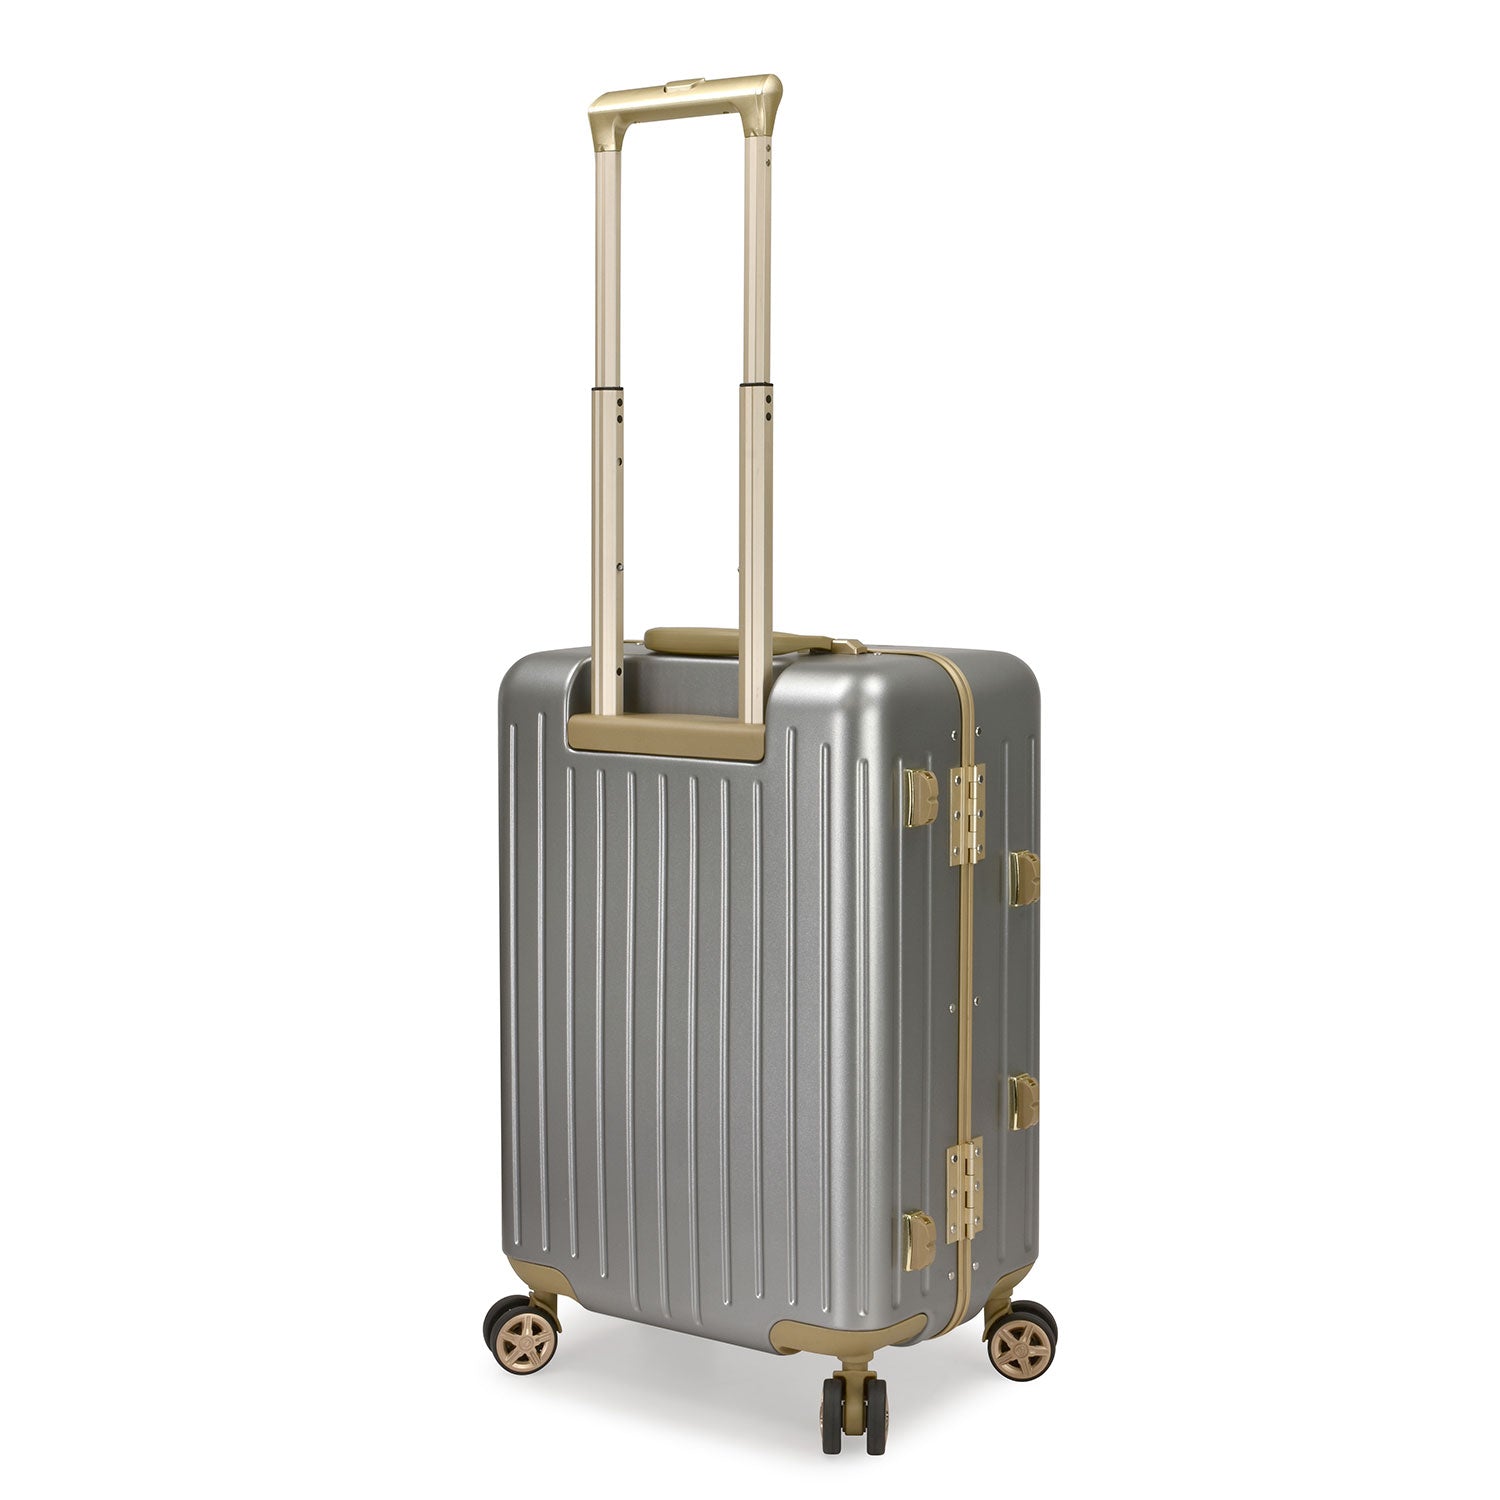 Monaghan Carry-on Spinner Suitcase